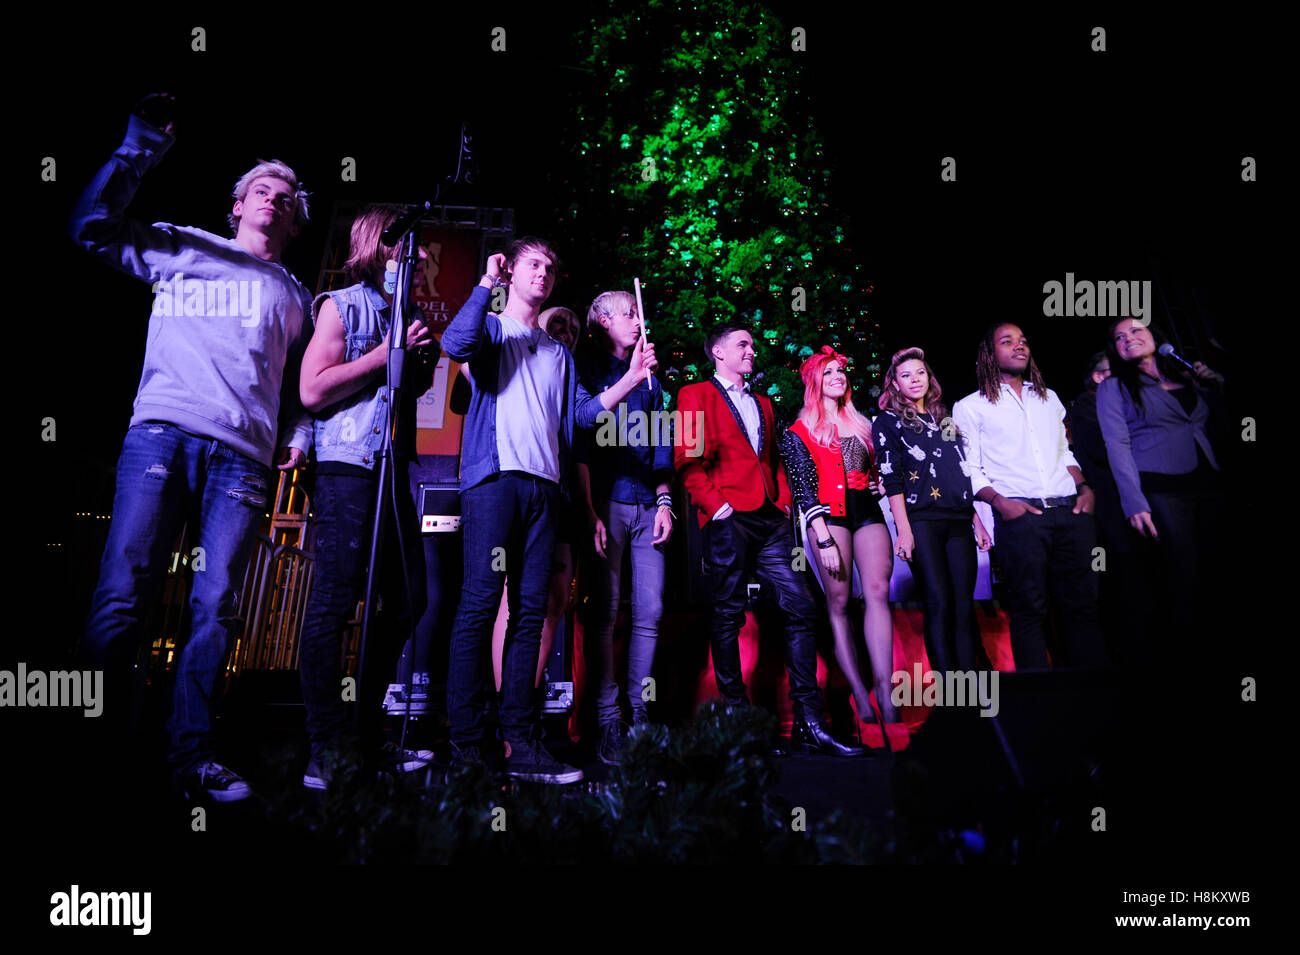 (L-R) Ross Lynch, R5, Jesse McCartney (c), Bonnie McKee and Leon Thomas (r) onstage at the Citadel Outlets Christmas Tree Lighting and Concert on November 9, 2013 in Los Angeles California. at the Citadel Outlets Christmas Tree Lighting and Concert on Nov Stock Photo